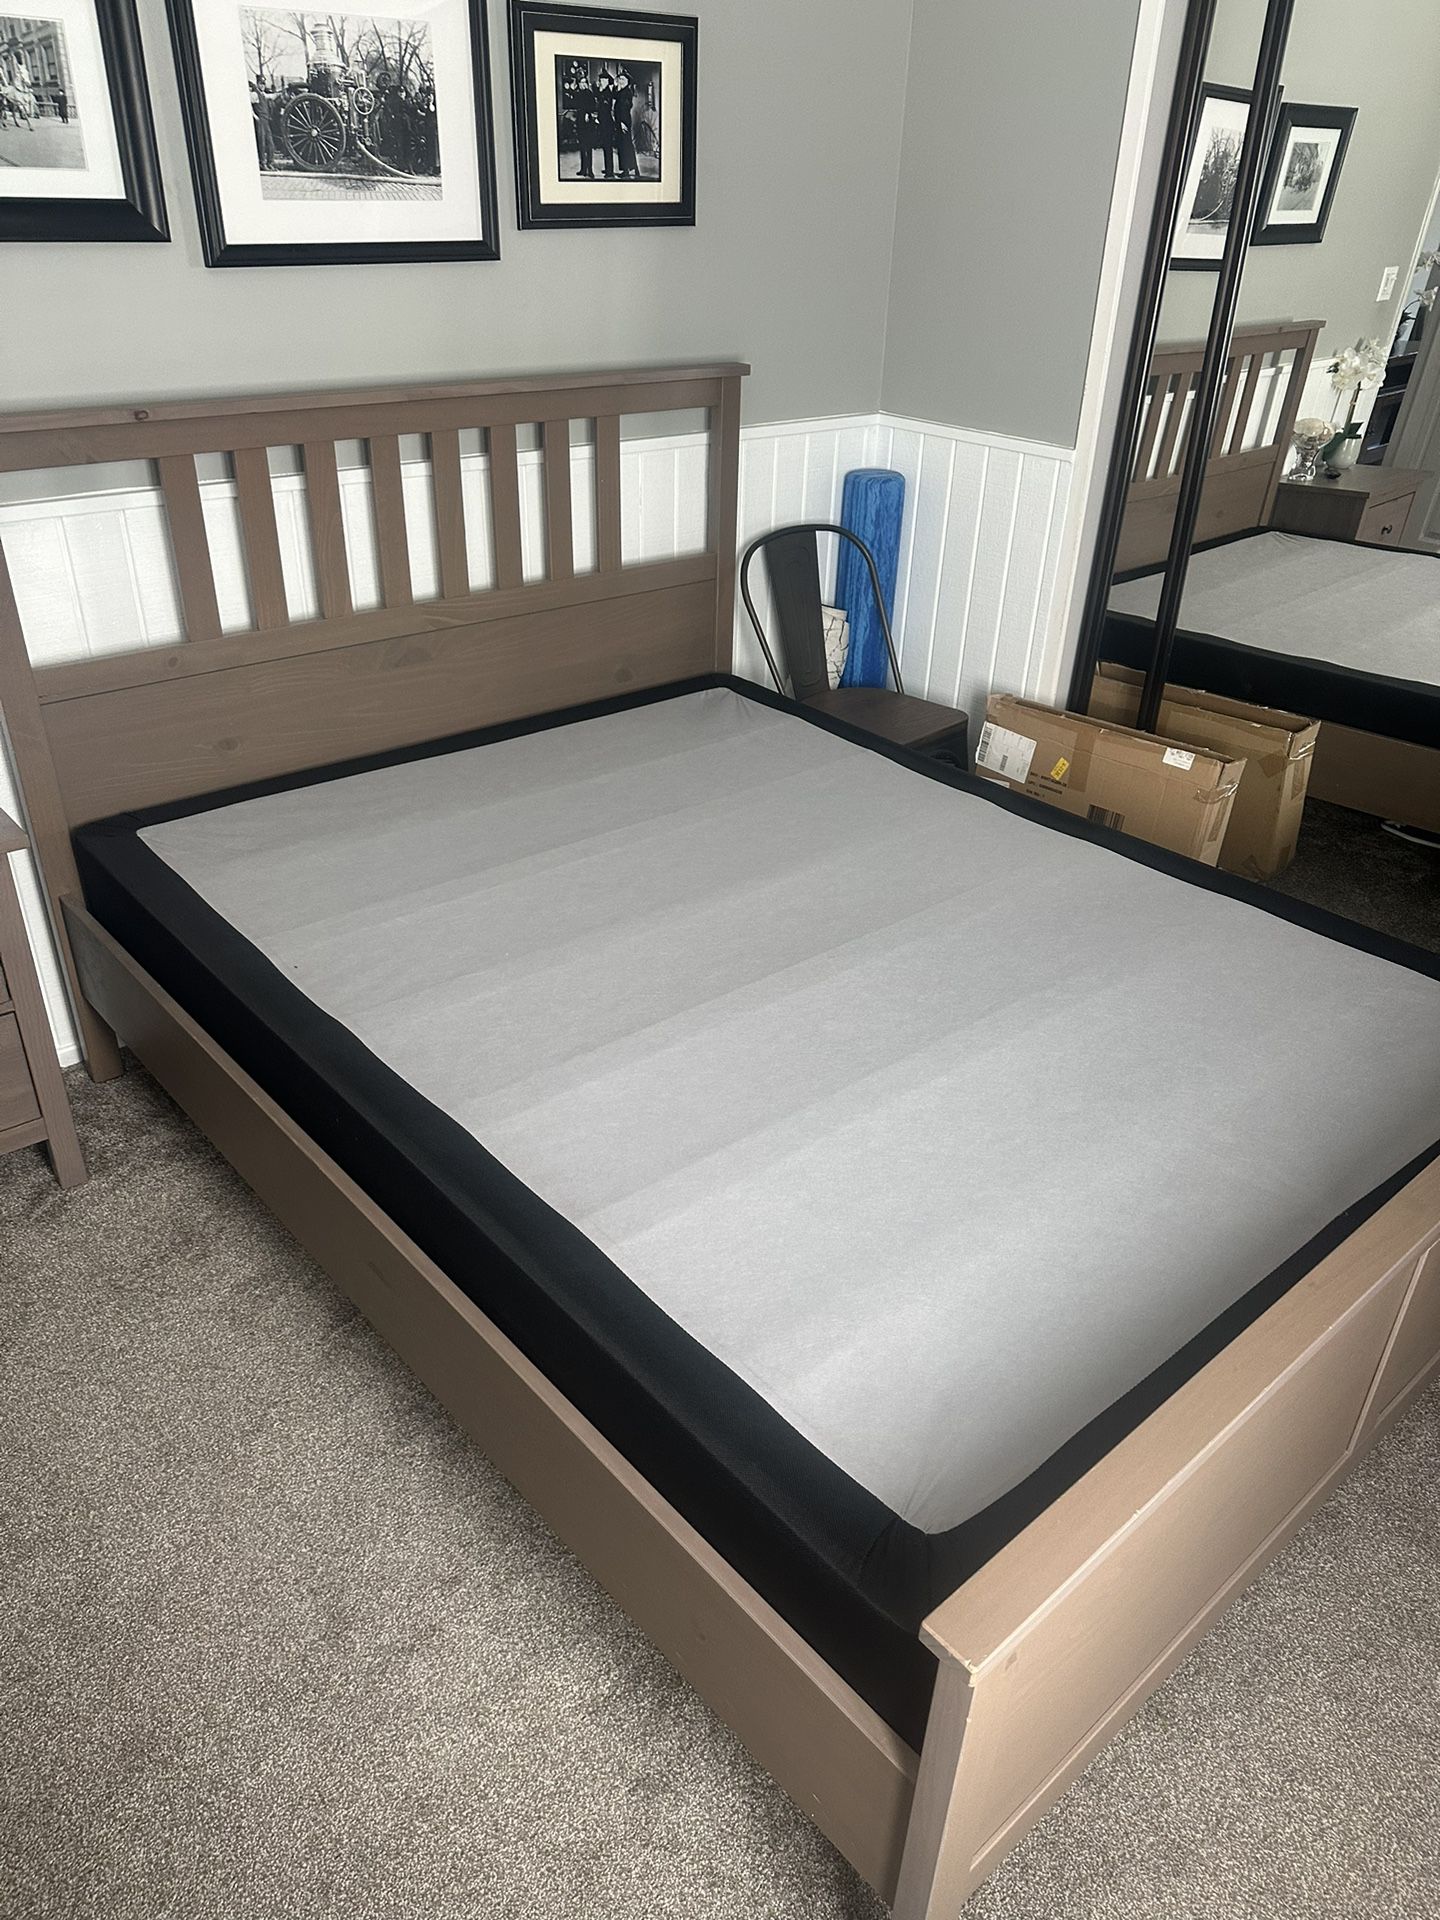 Hemnes Queen Bed Frame And Box Springs 